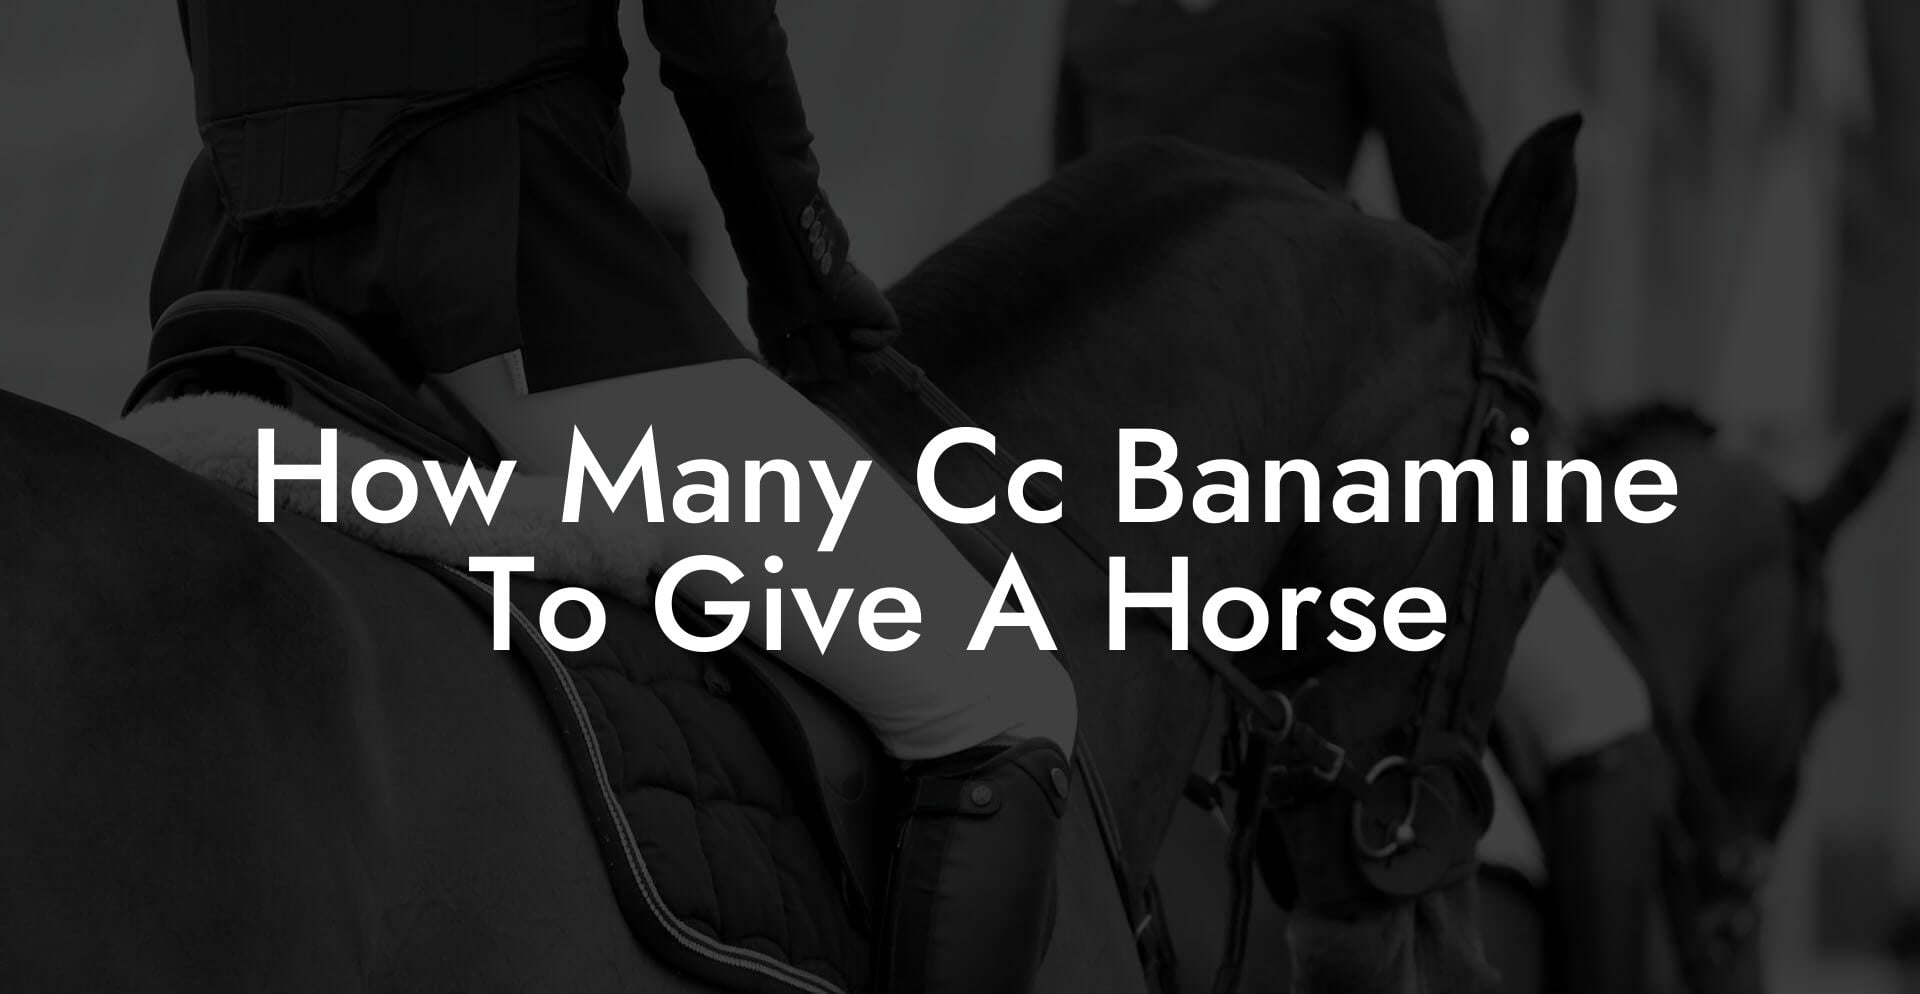 How Many Cc Banamine To Give A Horse